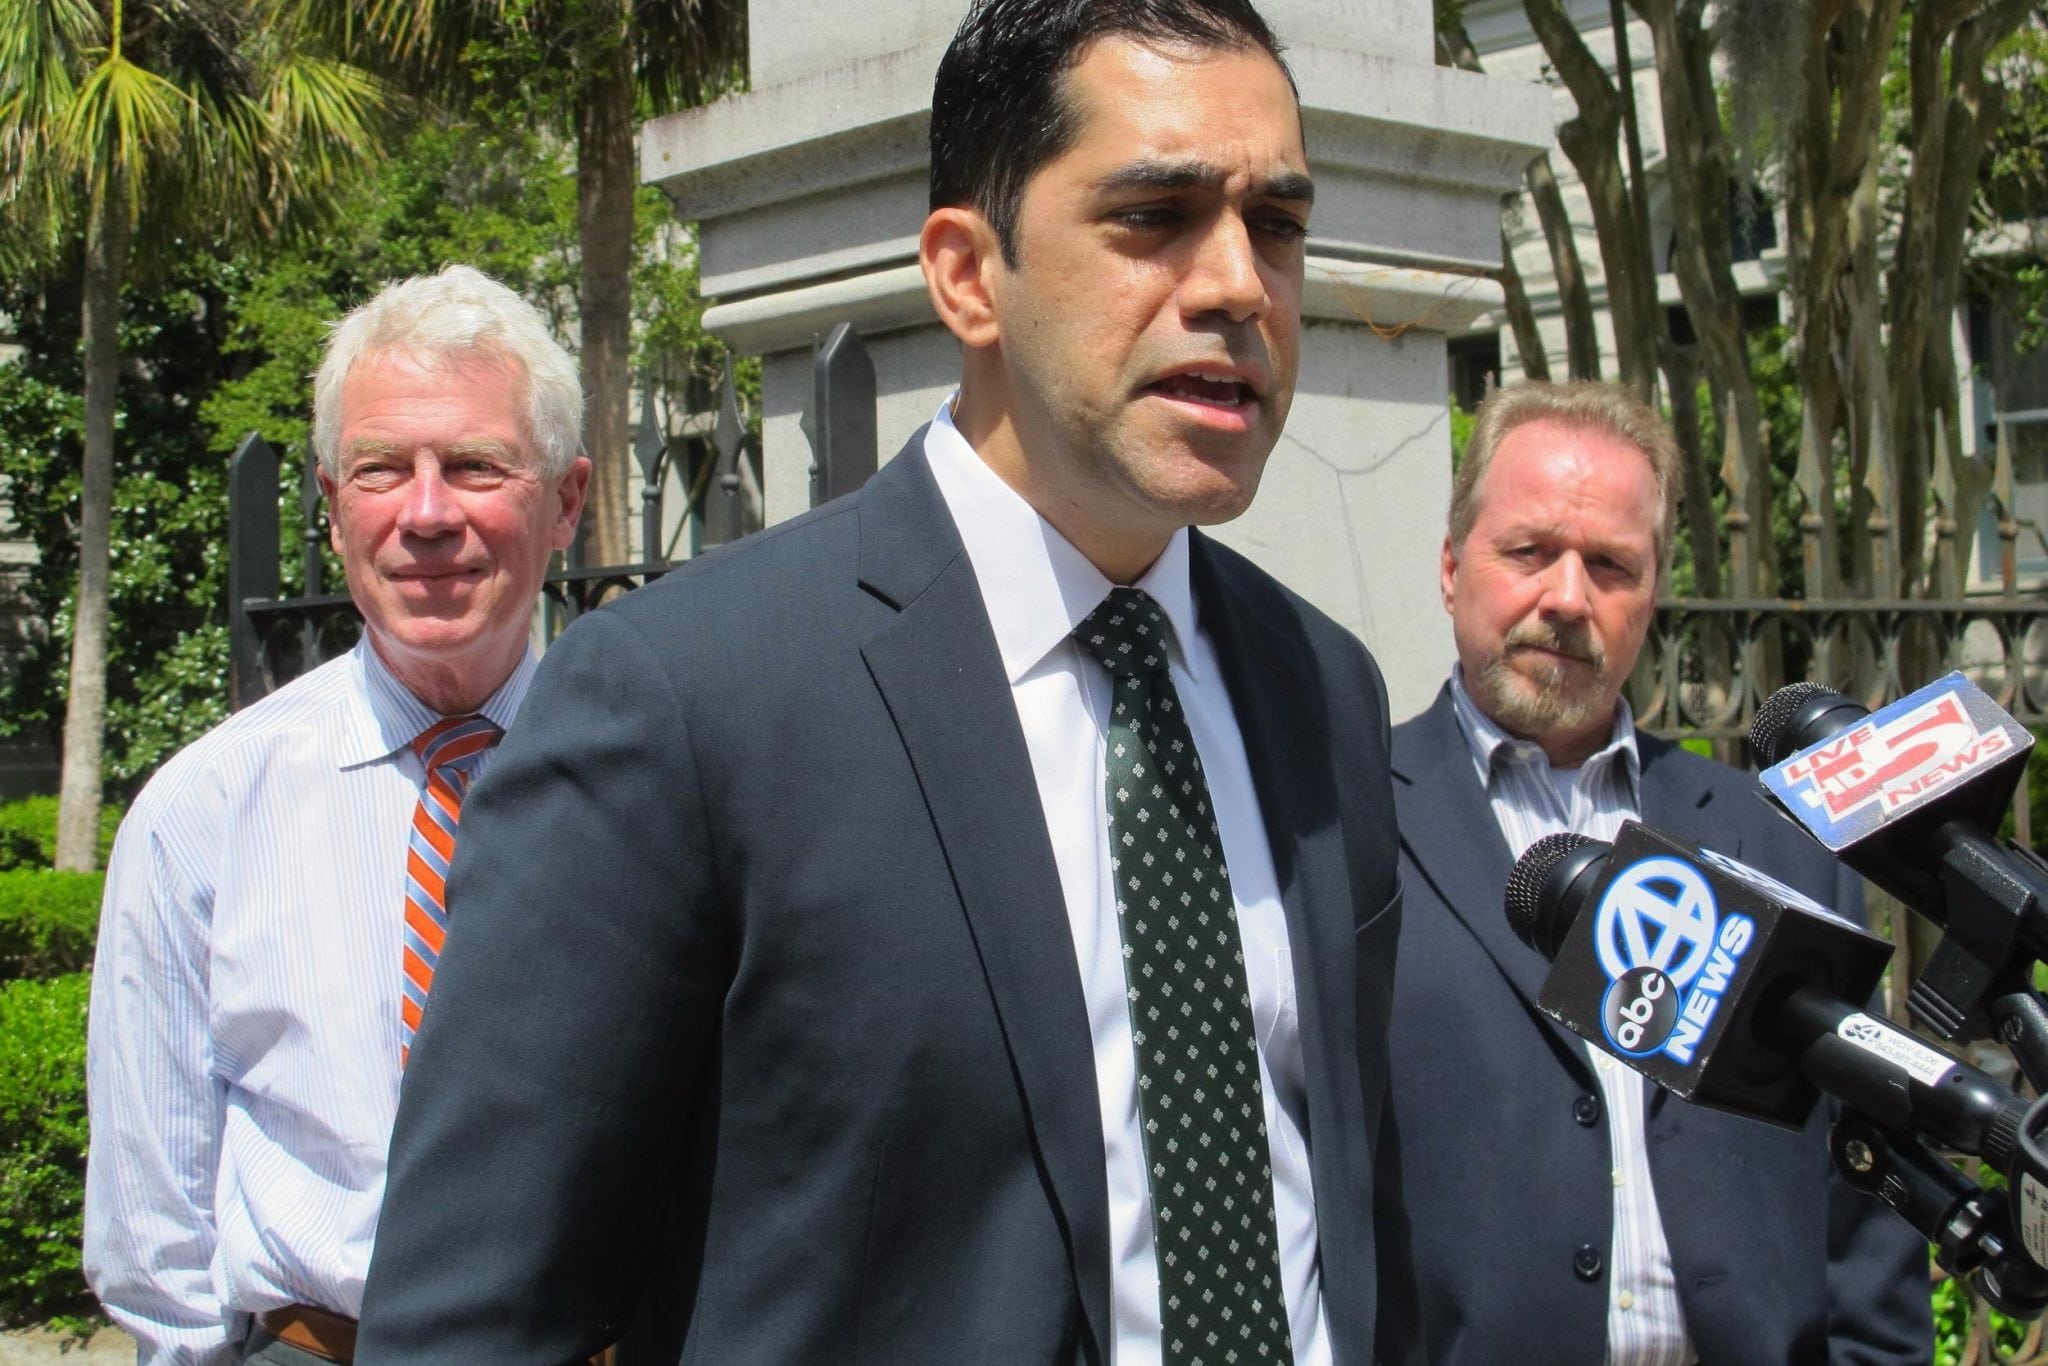 Attorney Arif Panju speaks with reporters outside the U.S. Courthouse in Charleston, S.C., on Tuesday, April 19, 2016. Behind Panju are Michael Nolan, left, and Michael Warfield, two of the three plaintiffs suing the city over the ordinance they claim violates their rights to free speech. 